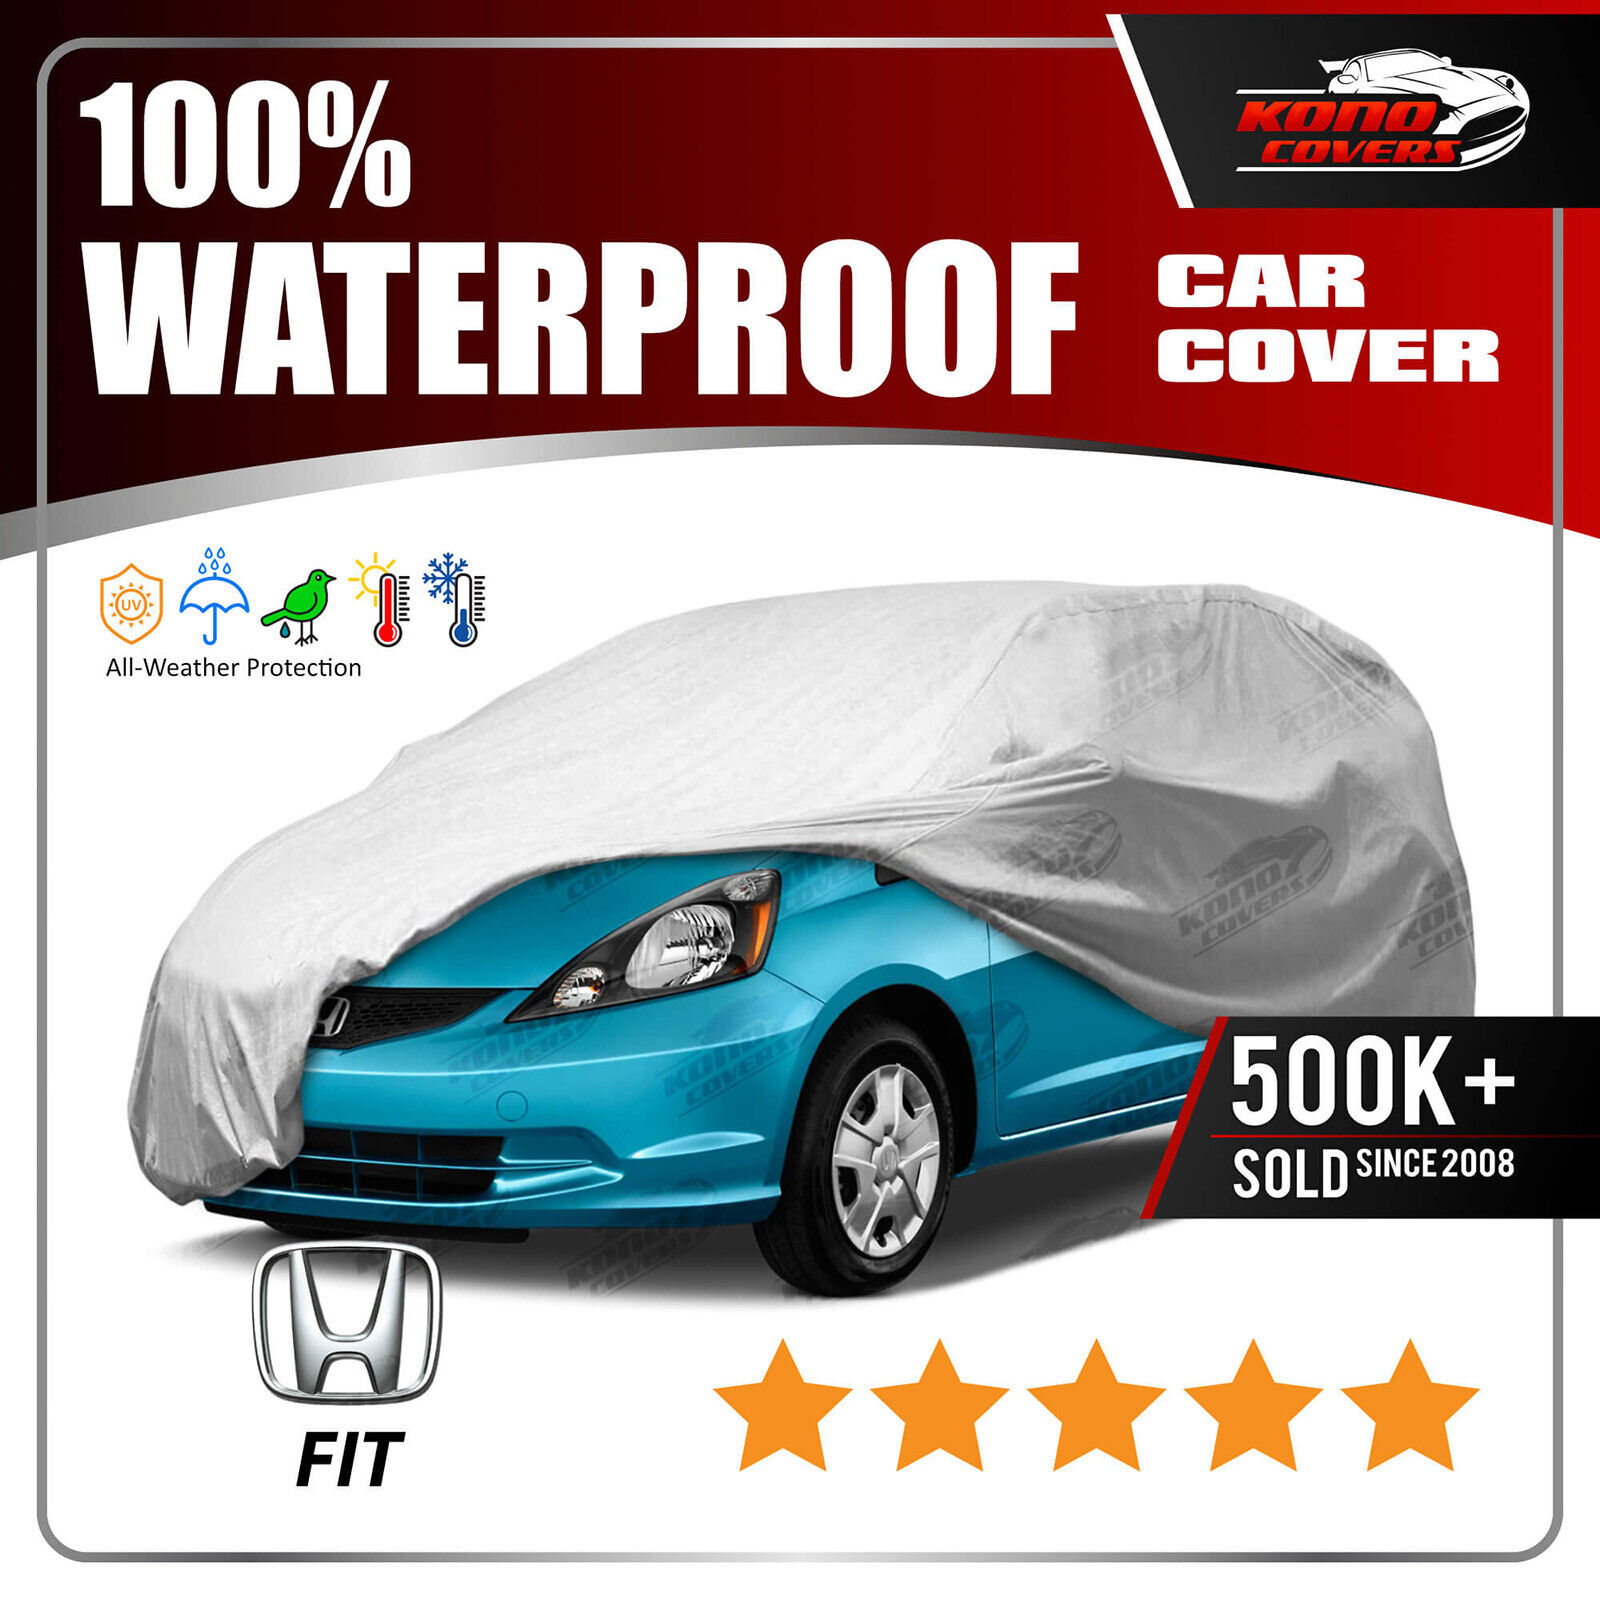 Fits HONDA FIT 2007-2013 CAR COVER - 100% Waterproof 100% Breathable